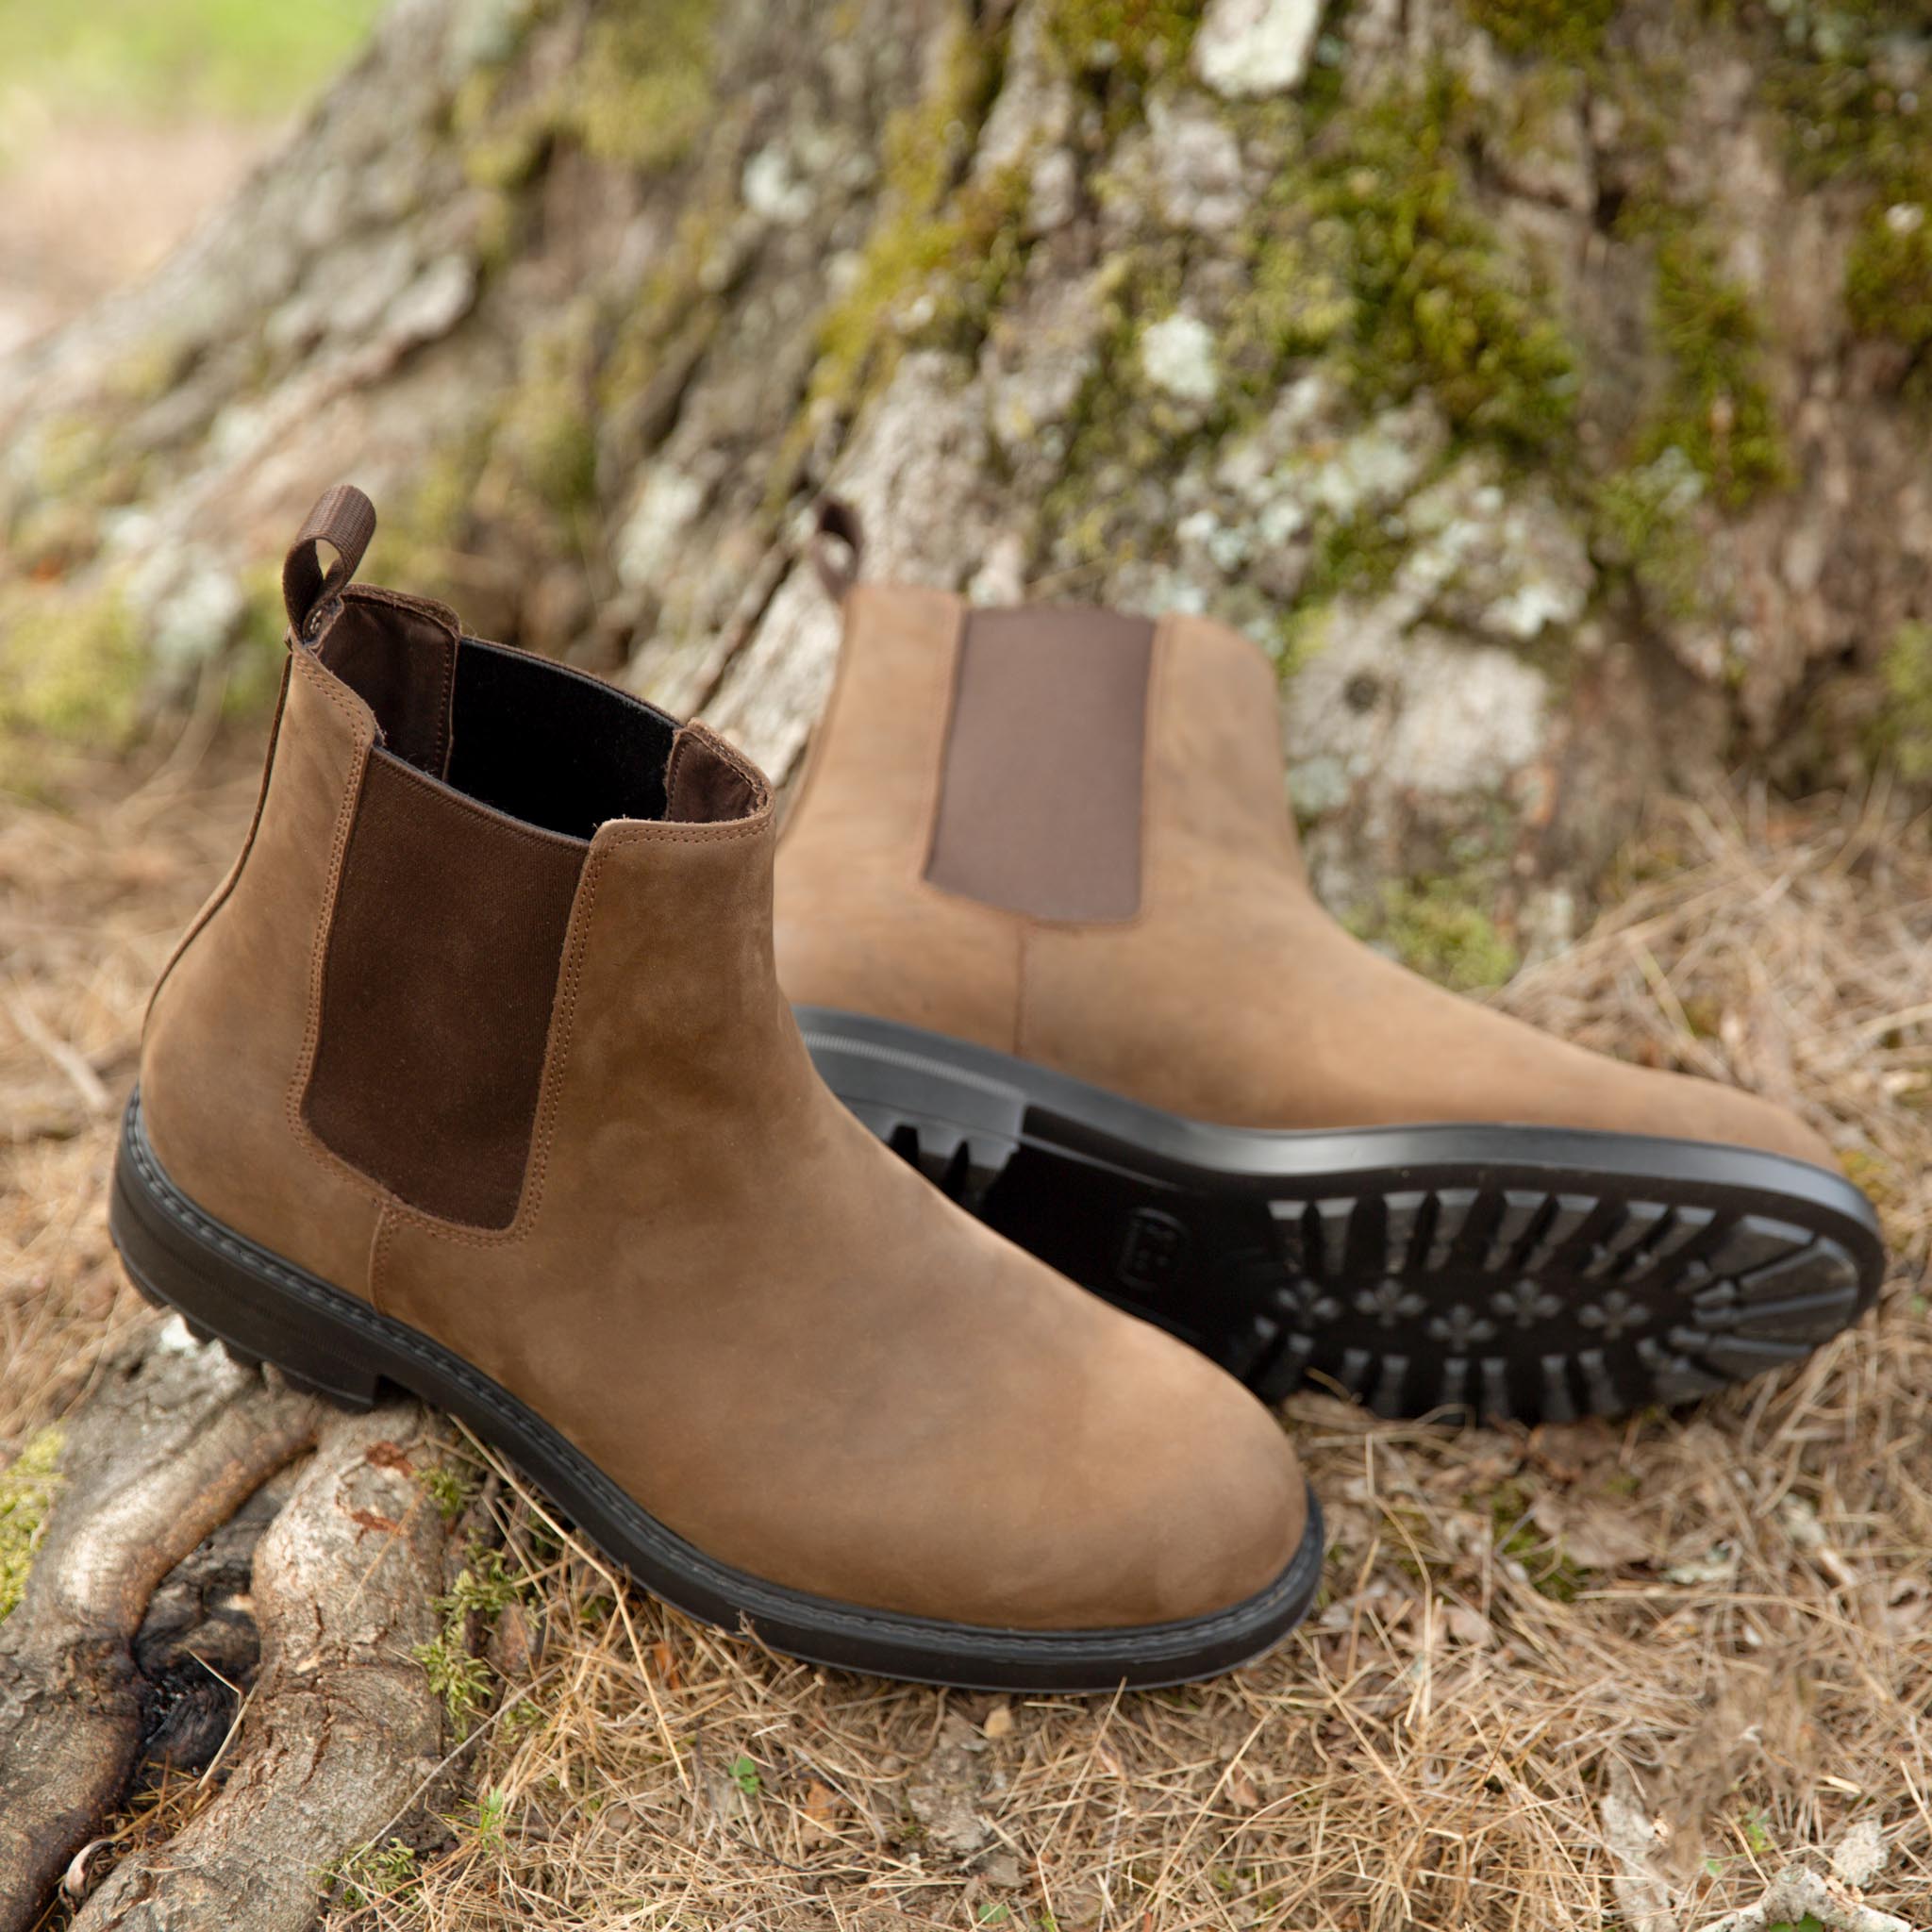 Image 4 of the Daytripper Chelsea Boot Steel